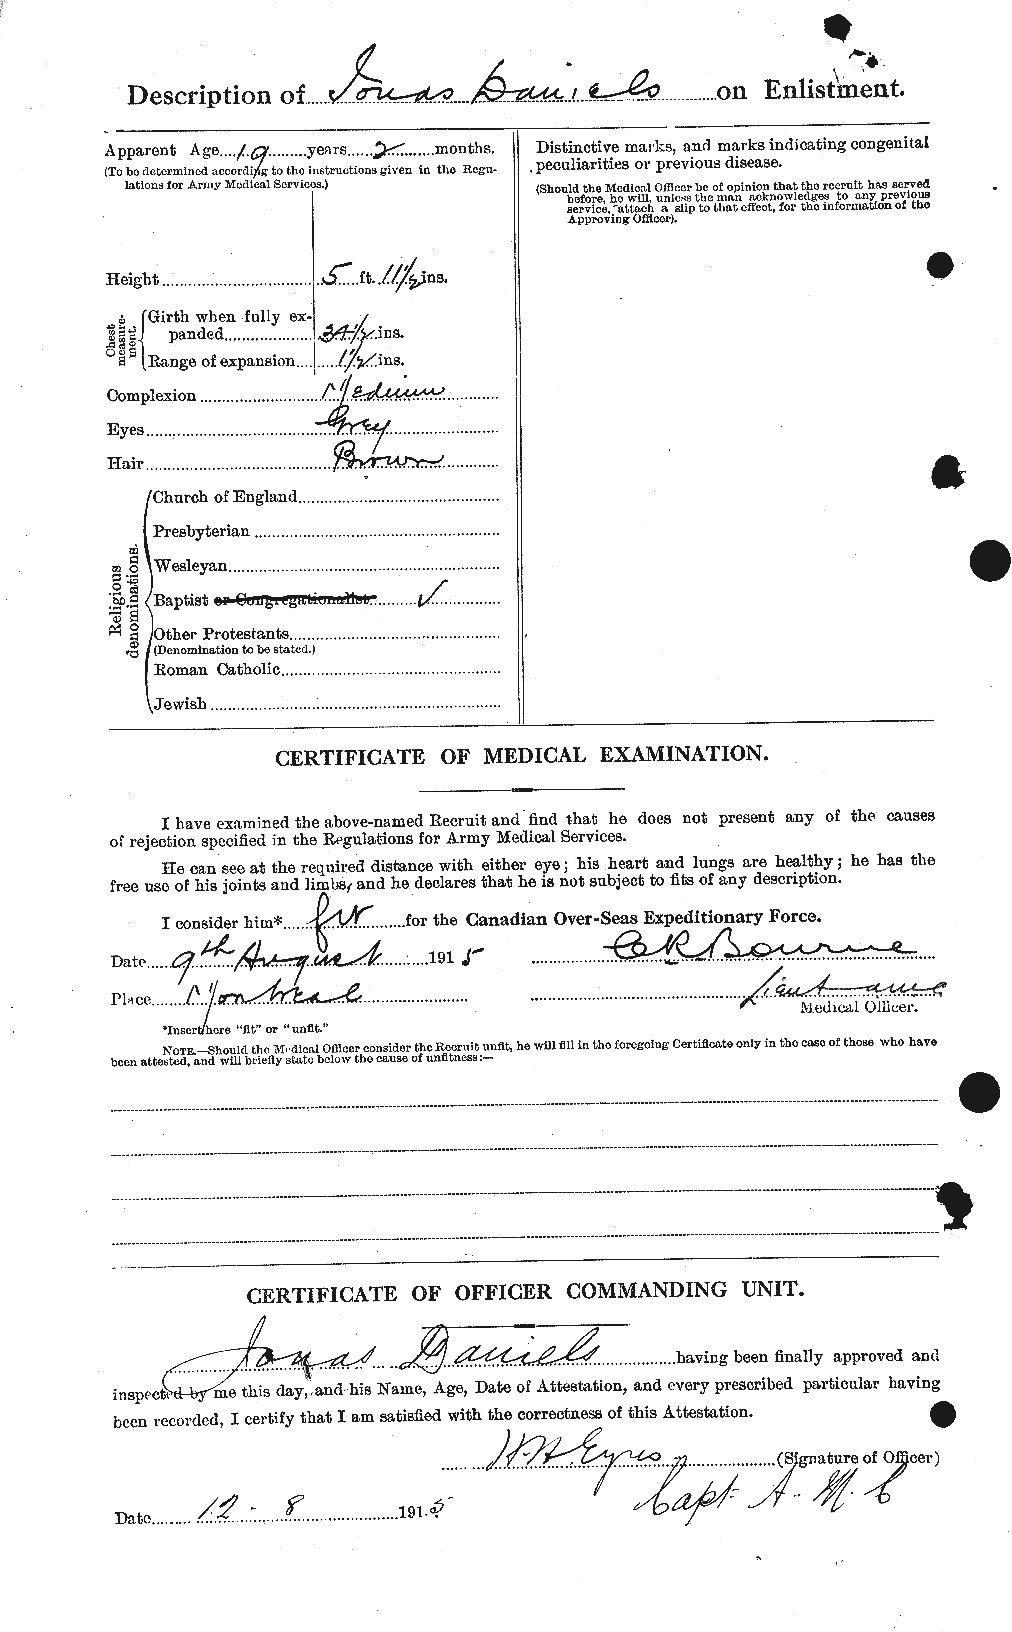 Personnel Records of the First World War - CEF 279647b